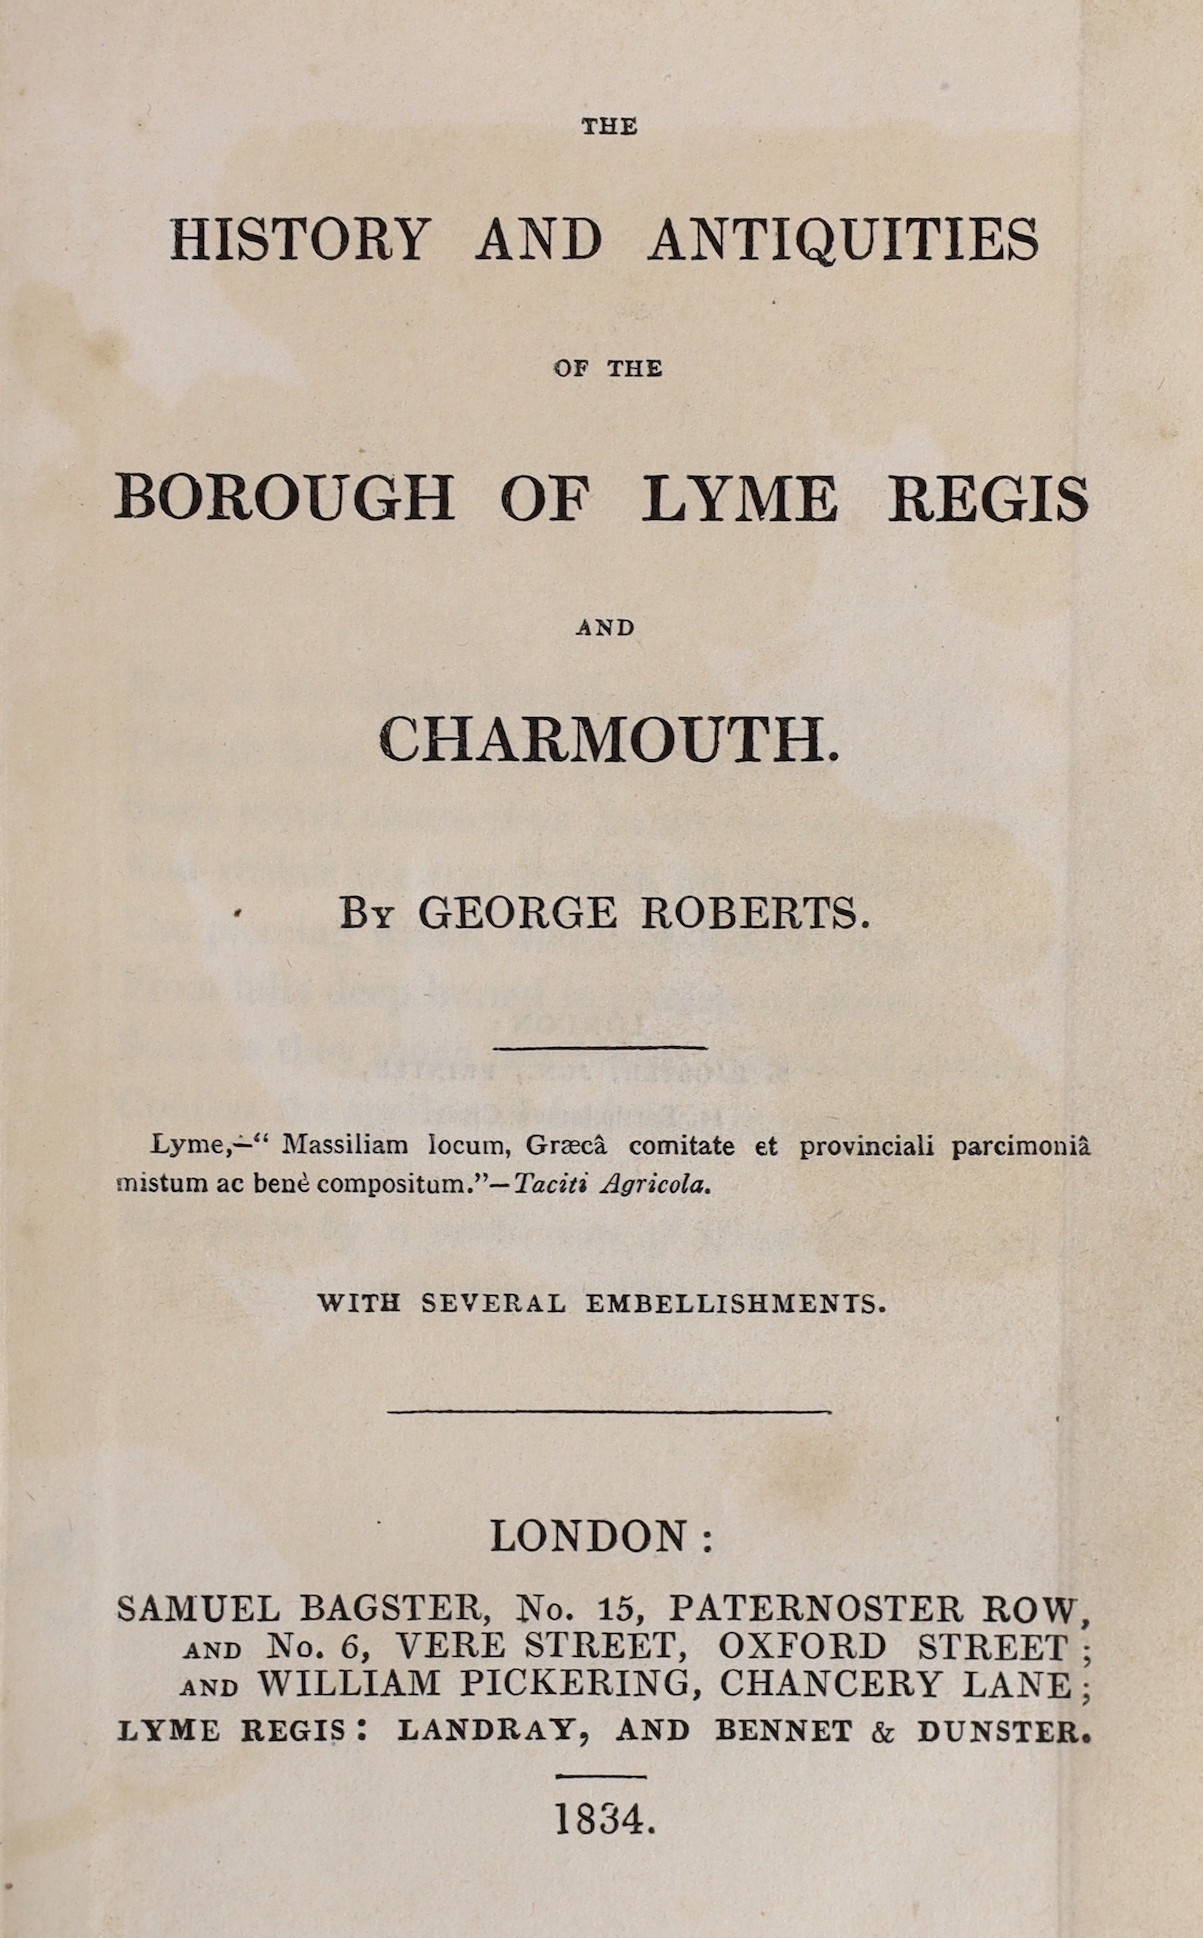 DORSET: Roberts, George - The History and Antiquities of the Borough of Lyme Regis and Charmouth. coloured and folded map, folded plate and text engravings, subscribers list, additions / errata leaf; later 19th cent. hal